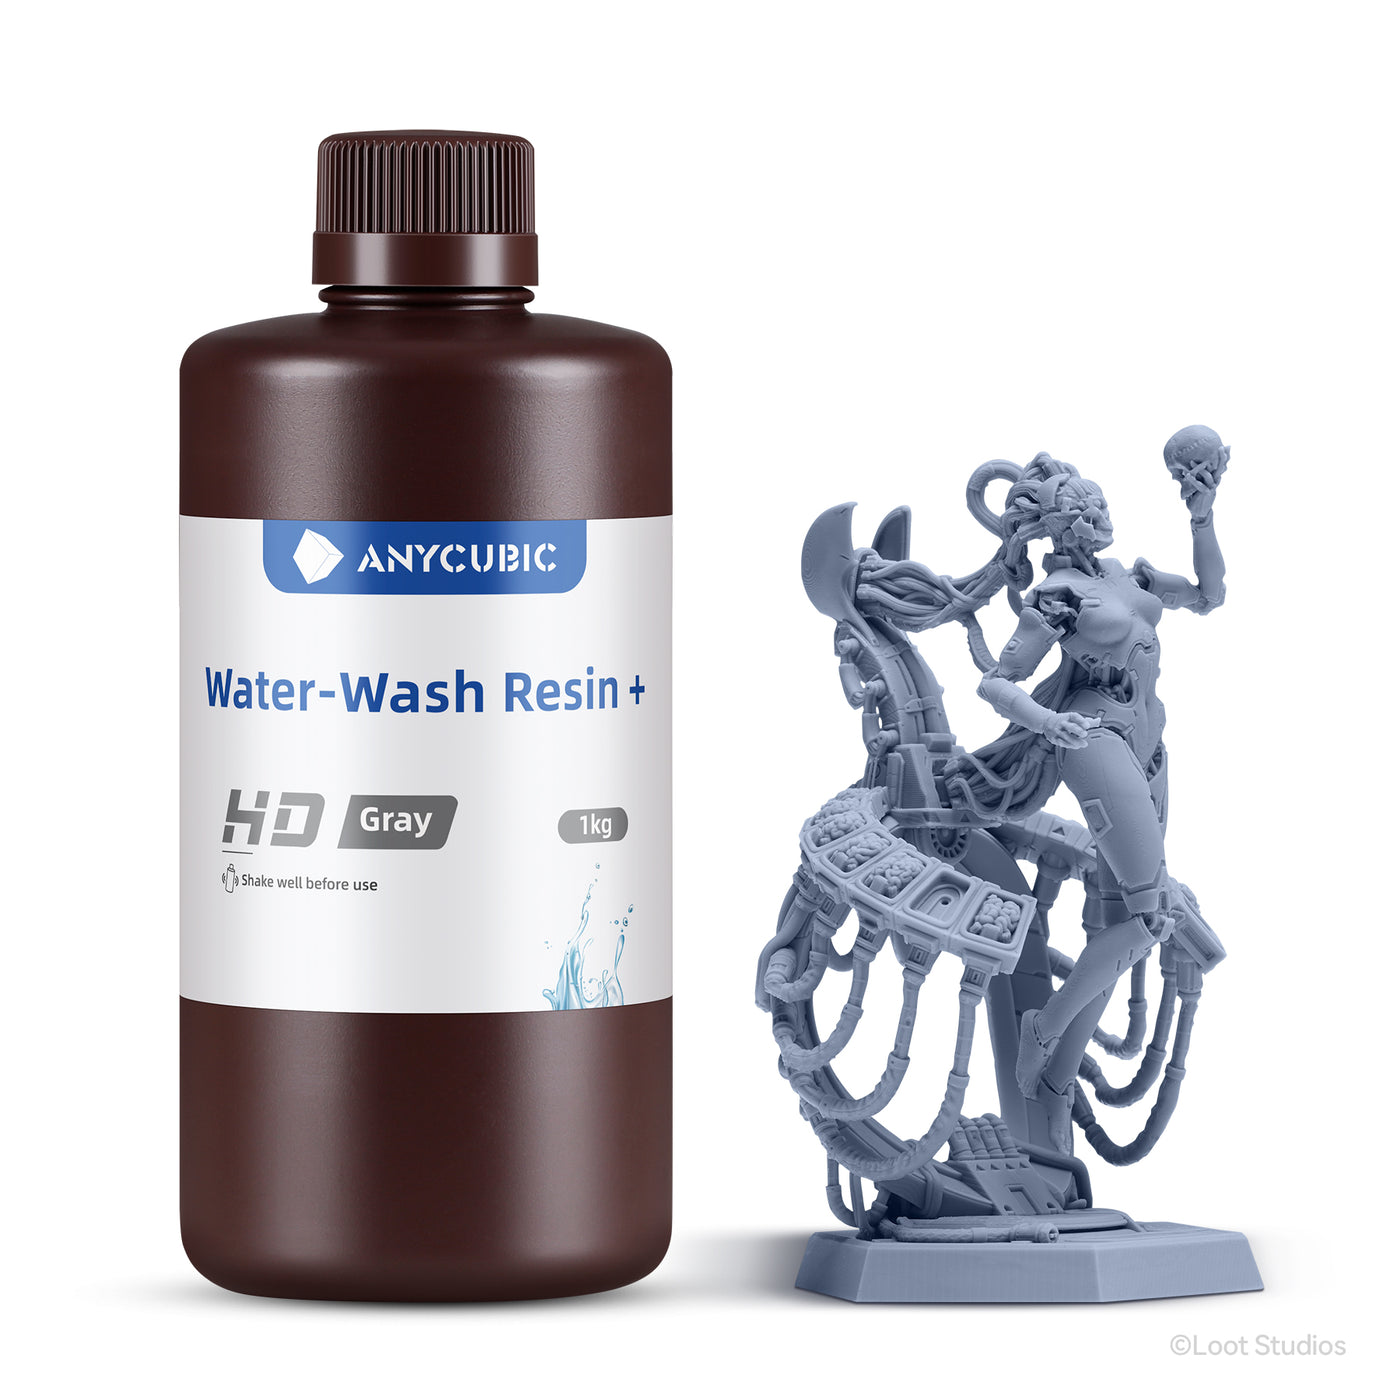 Anycubic Water-Wash Resin+: Eco-friendly Water-washable resins for LCD/ SLA  3D Printing – ANYCUBIC-US